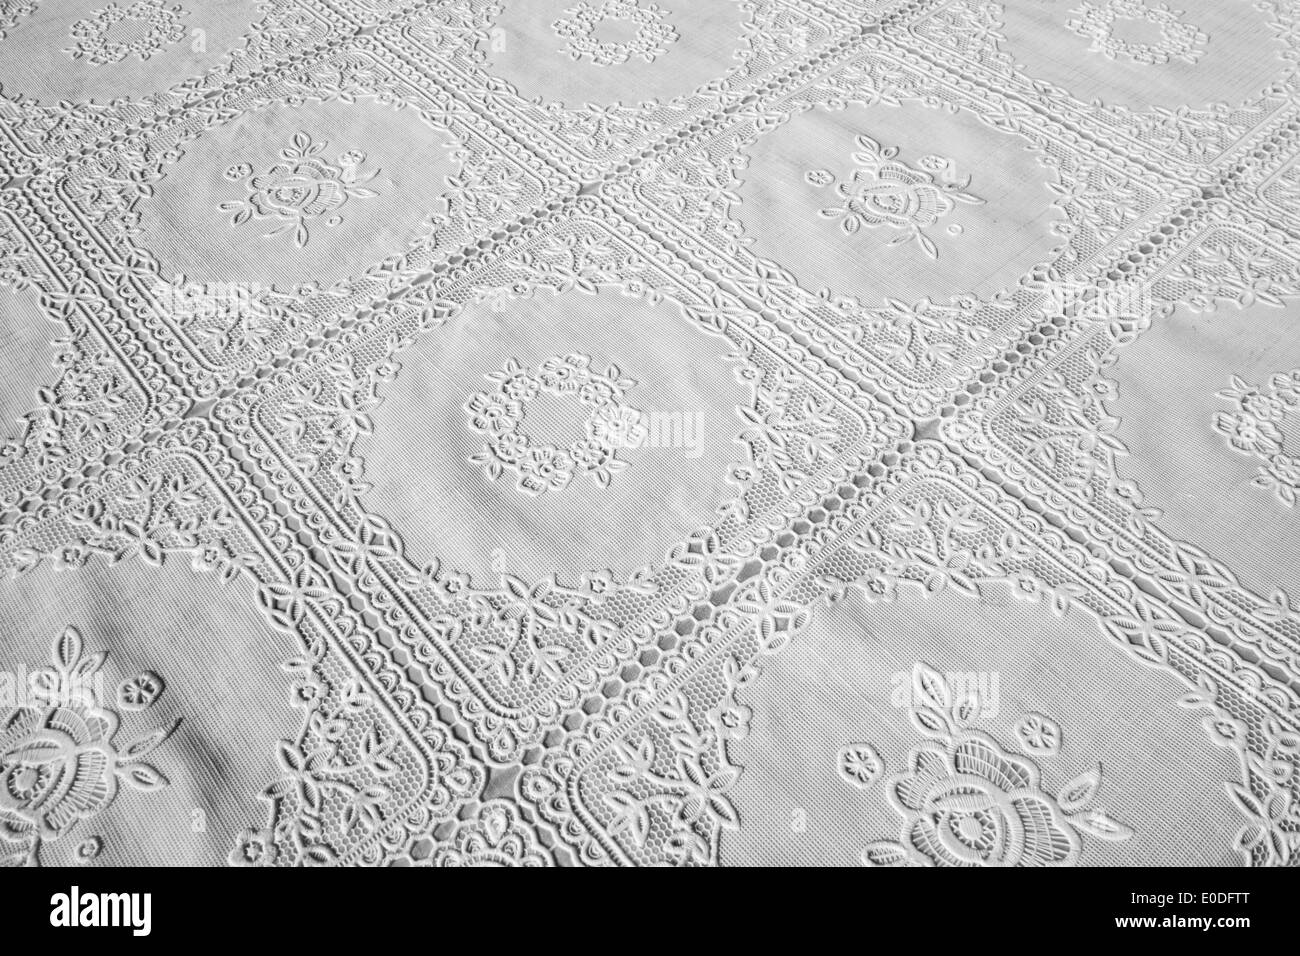 Paisley detail Black and White Stock Photos & Images - Alamy